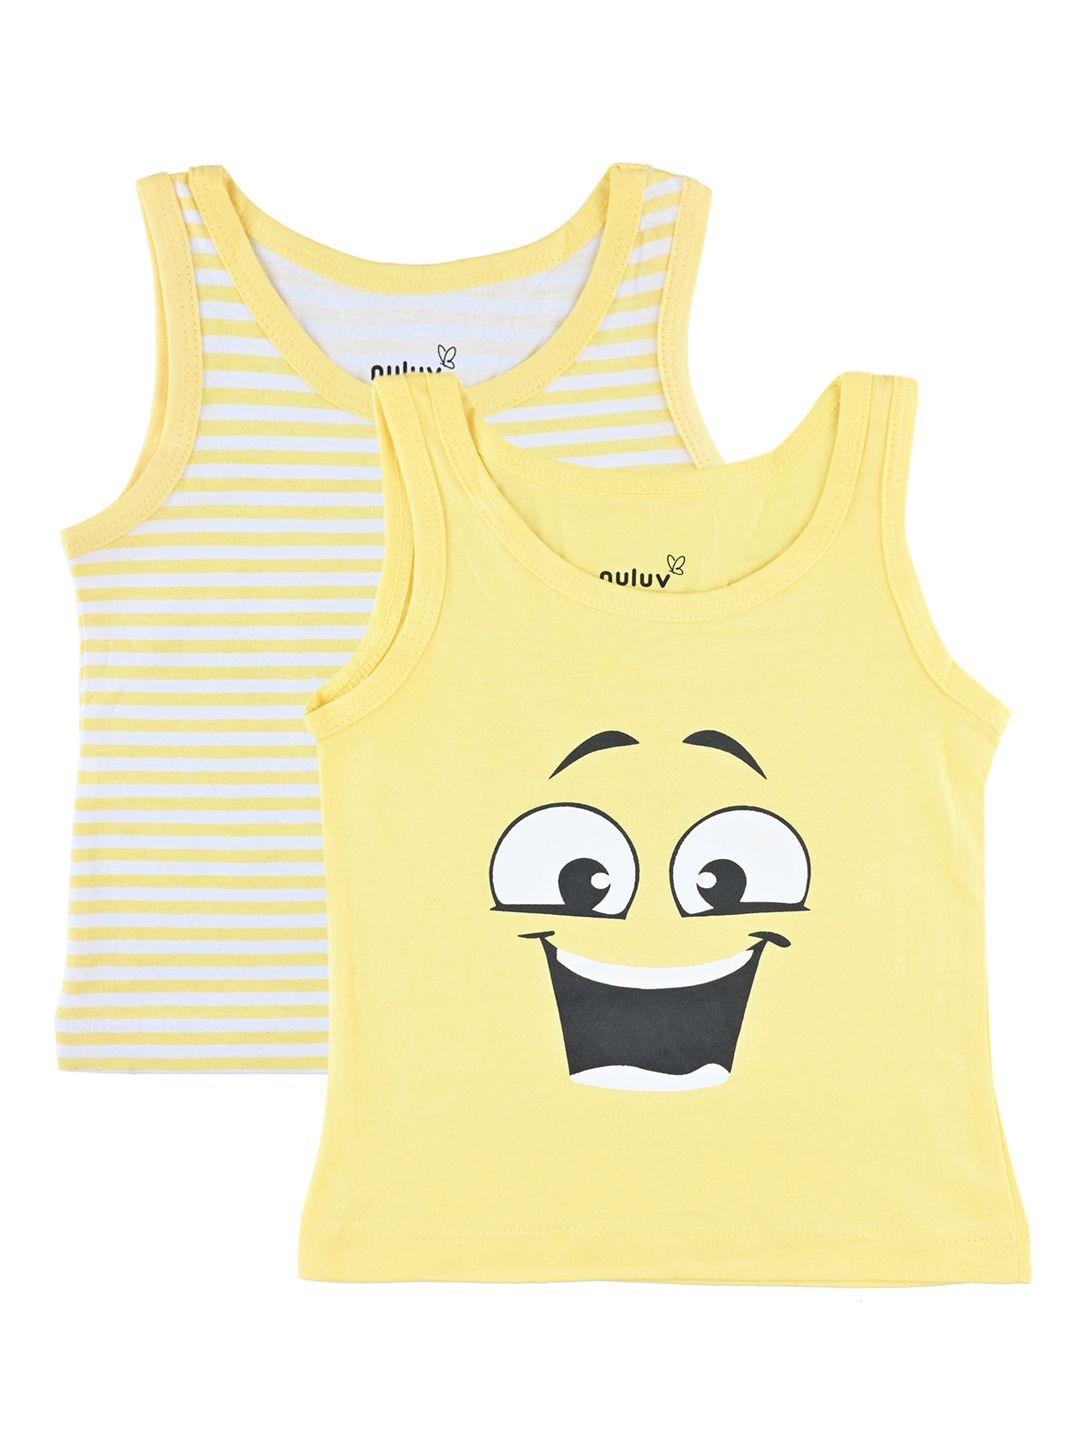 nuluv-boys-pack-of-2-yellow-&-white-printed-cotton-innerwear-vests